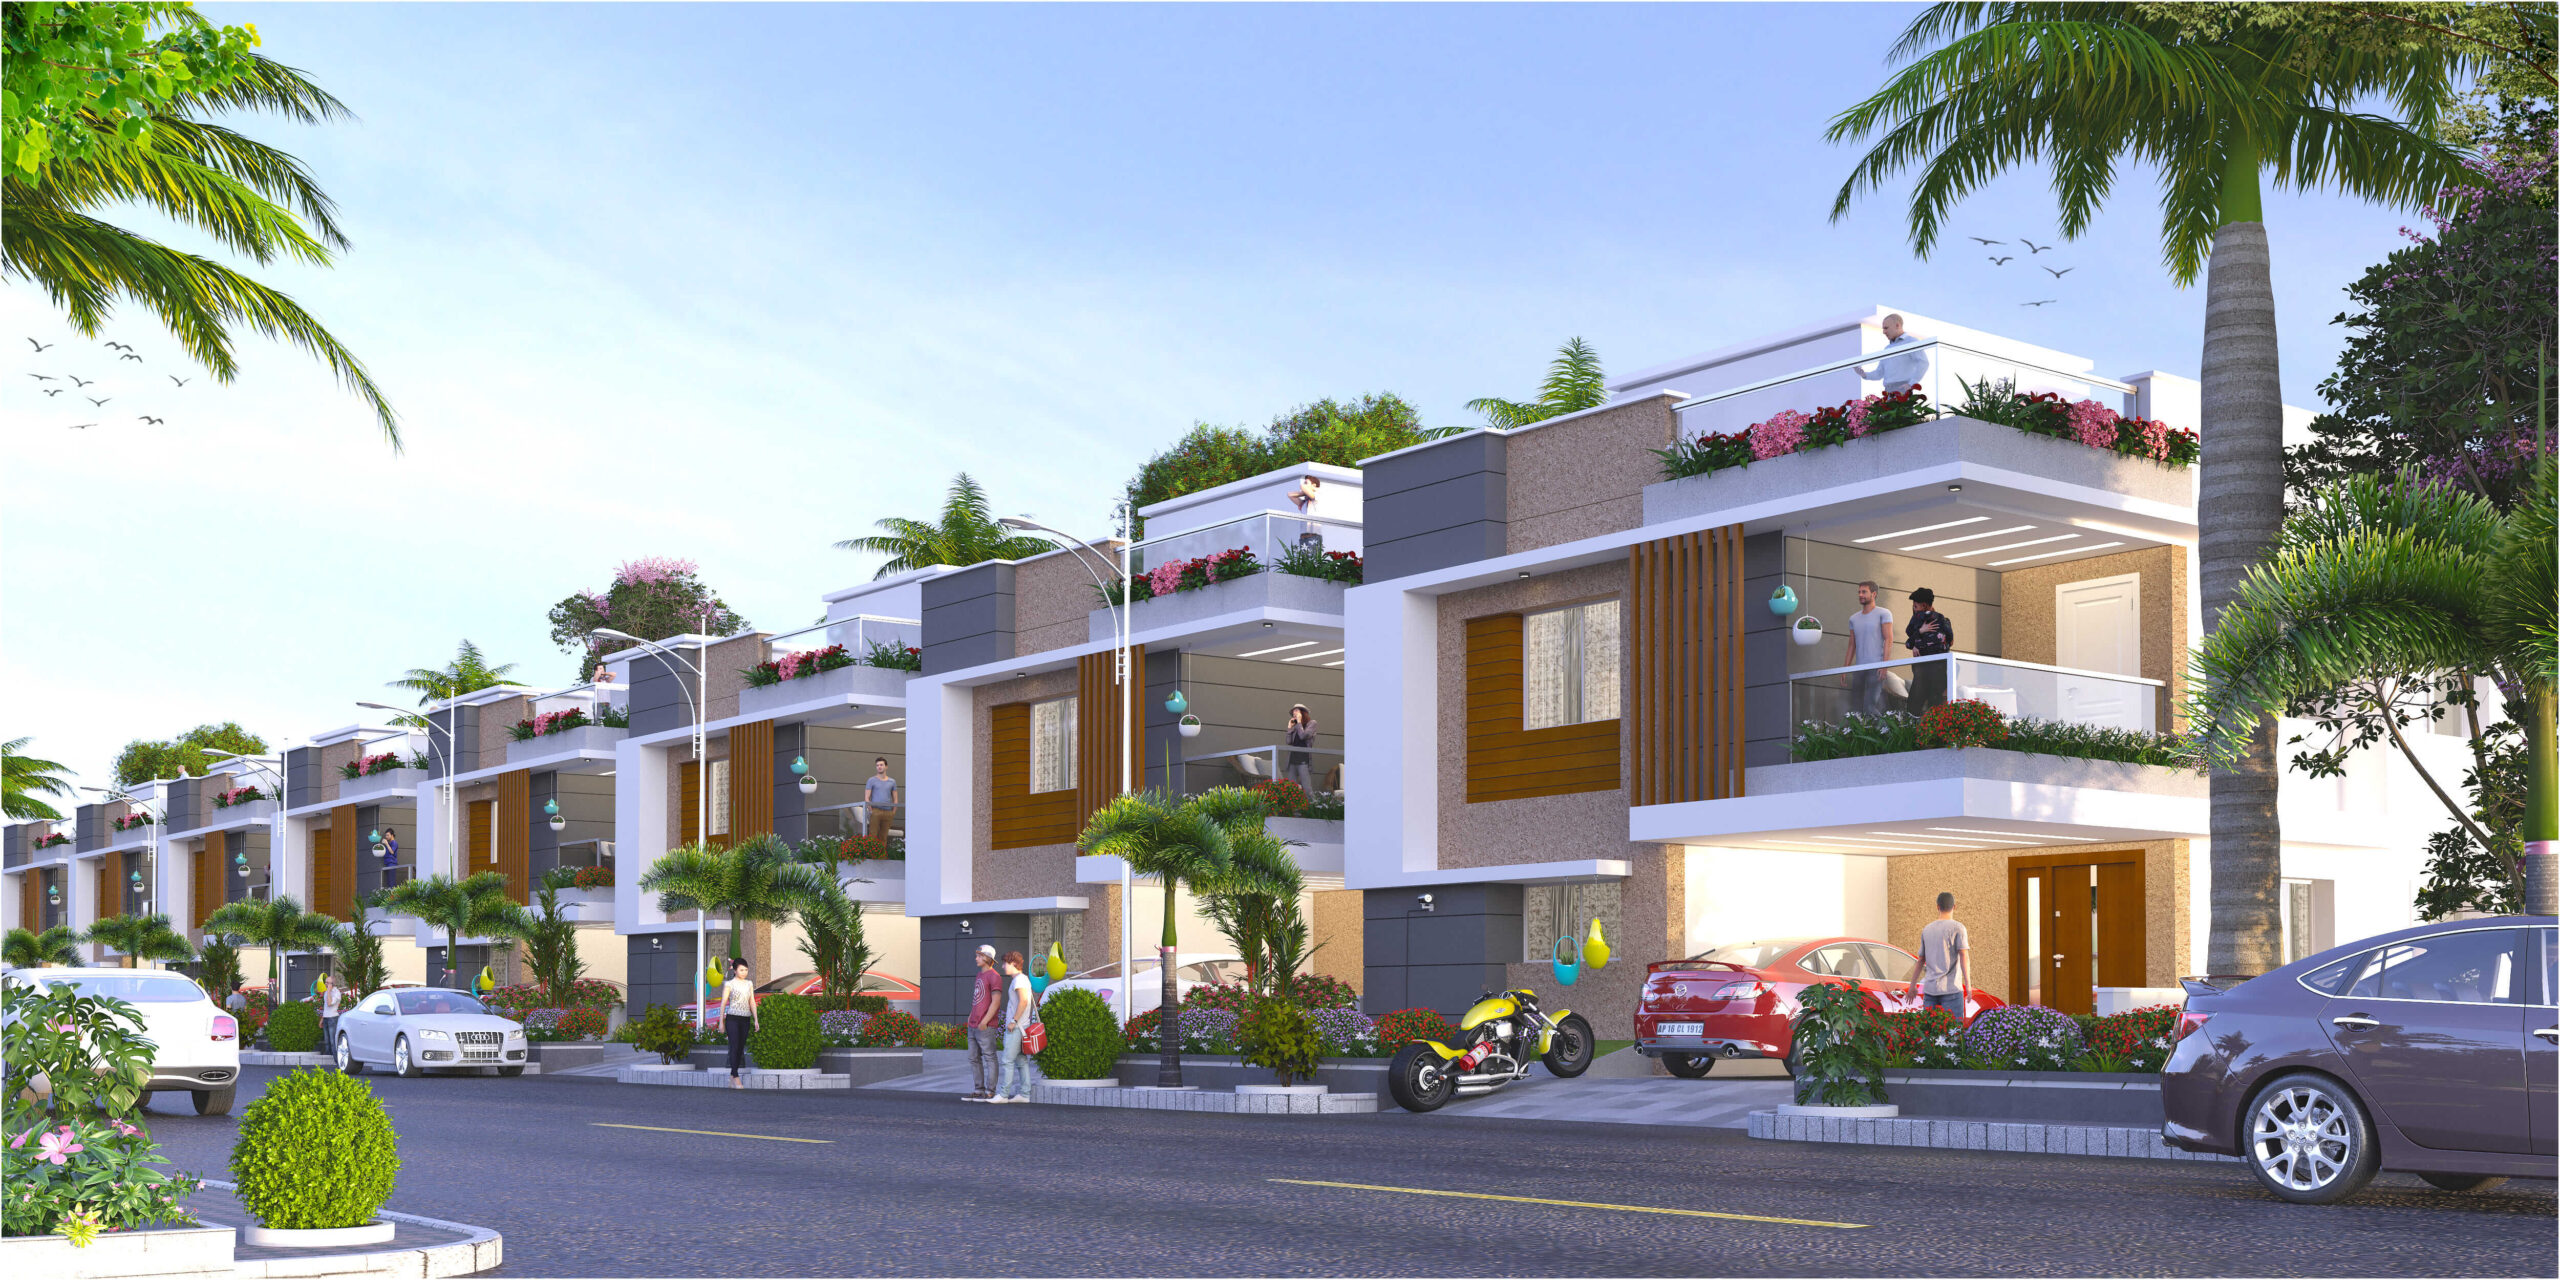 3BHK duplex villas for sale in Gagillapur  | APR Group,Hyderabad,Real Estate,For Sale : House & Apartment